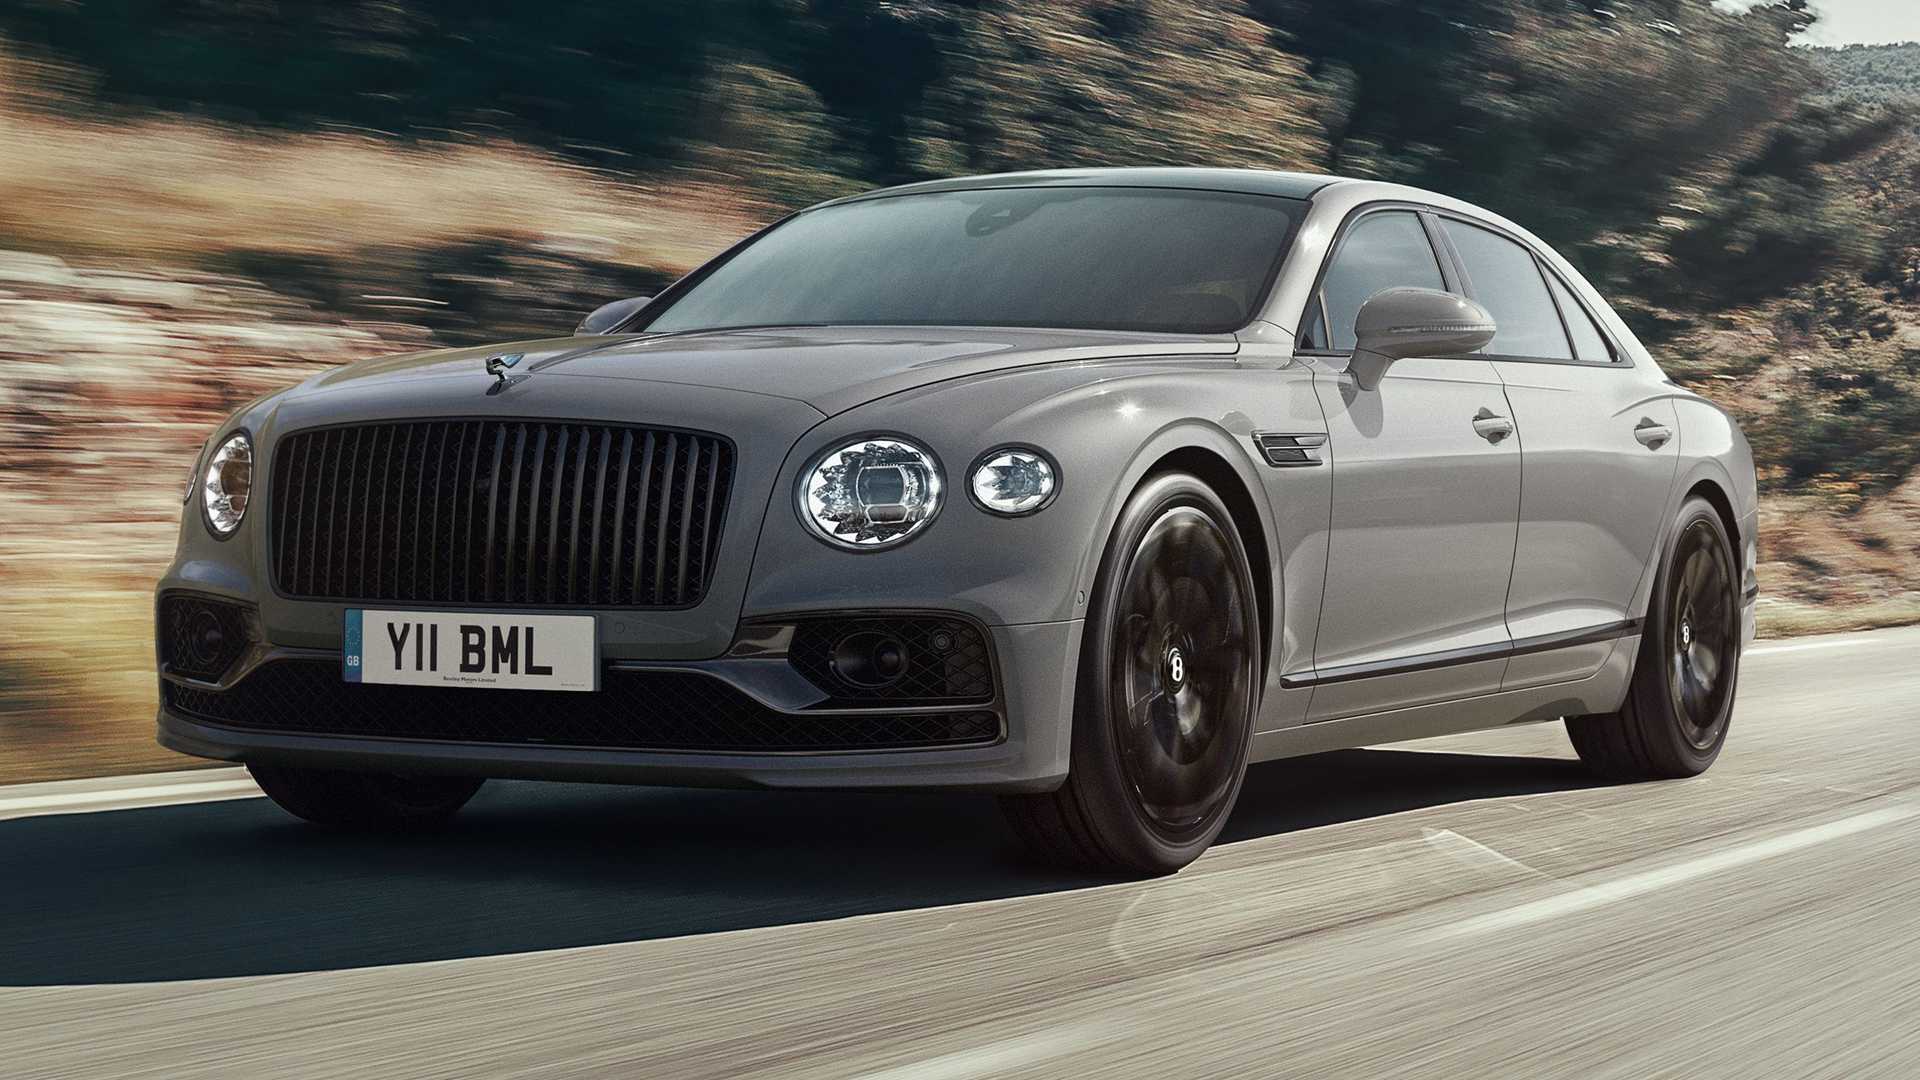 2022 Bentley Flying Spur W12 for Sale: The Most Luxurious Car on the Market